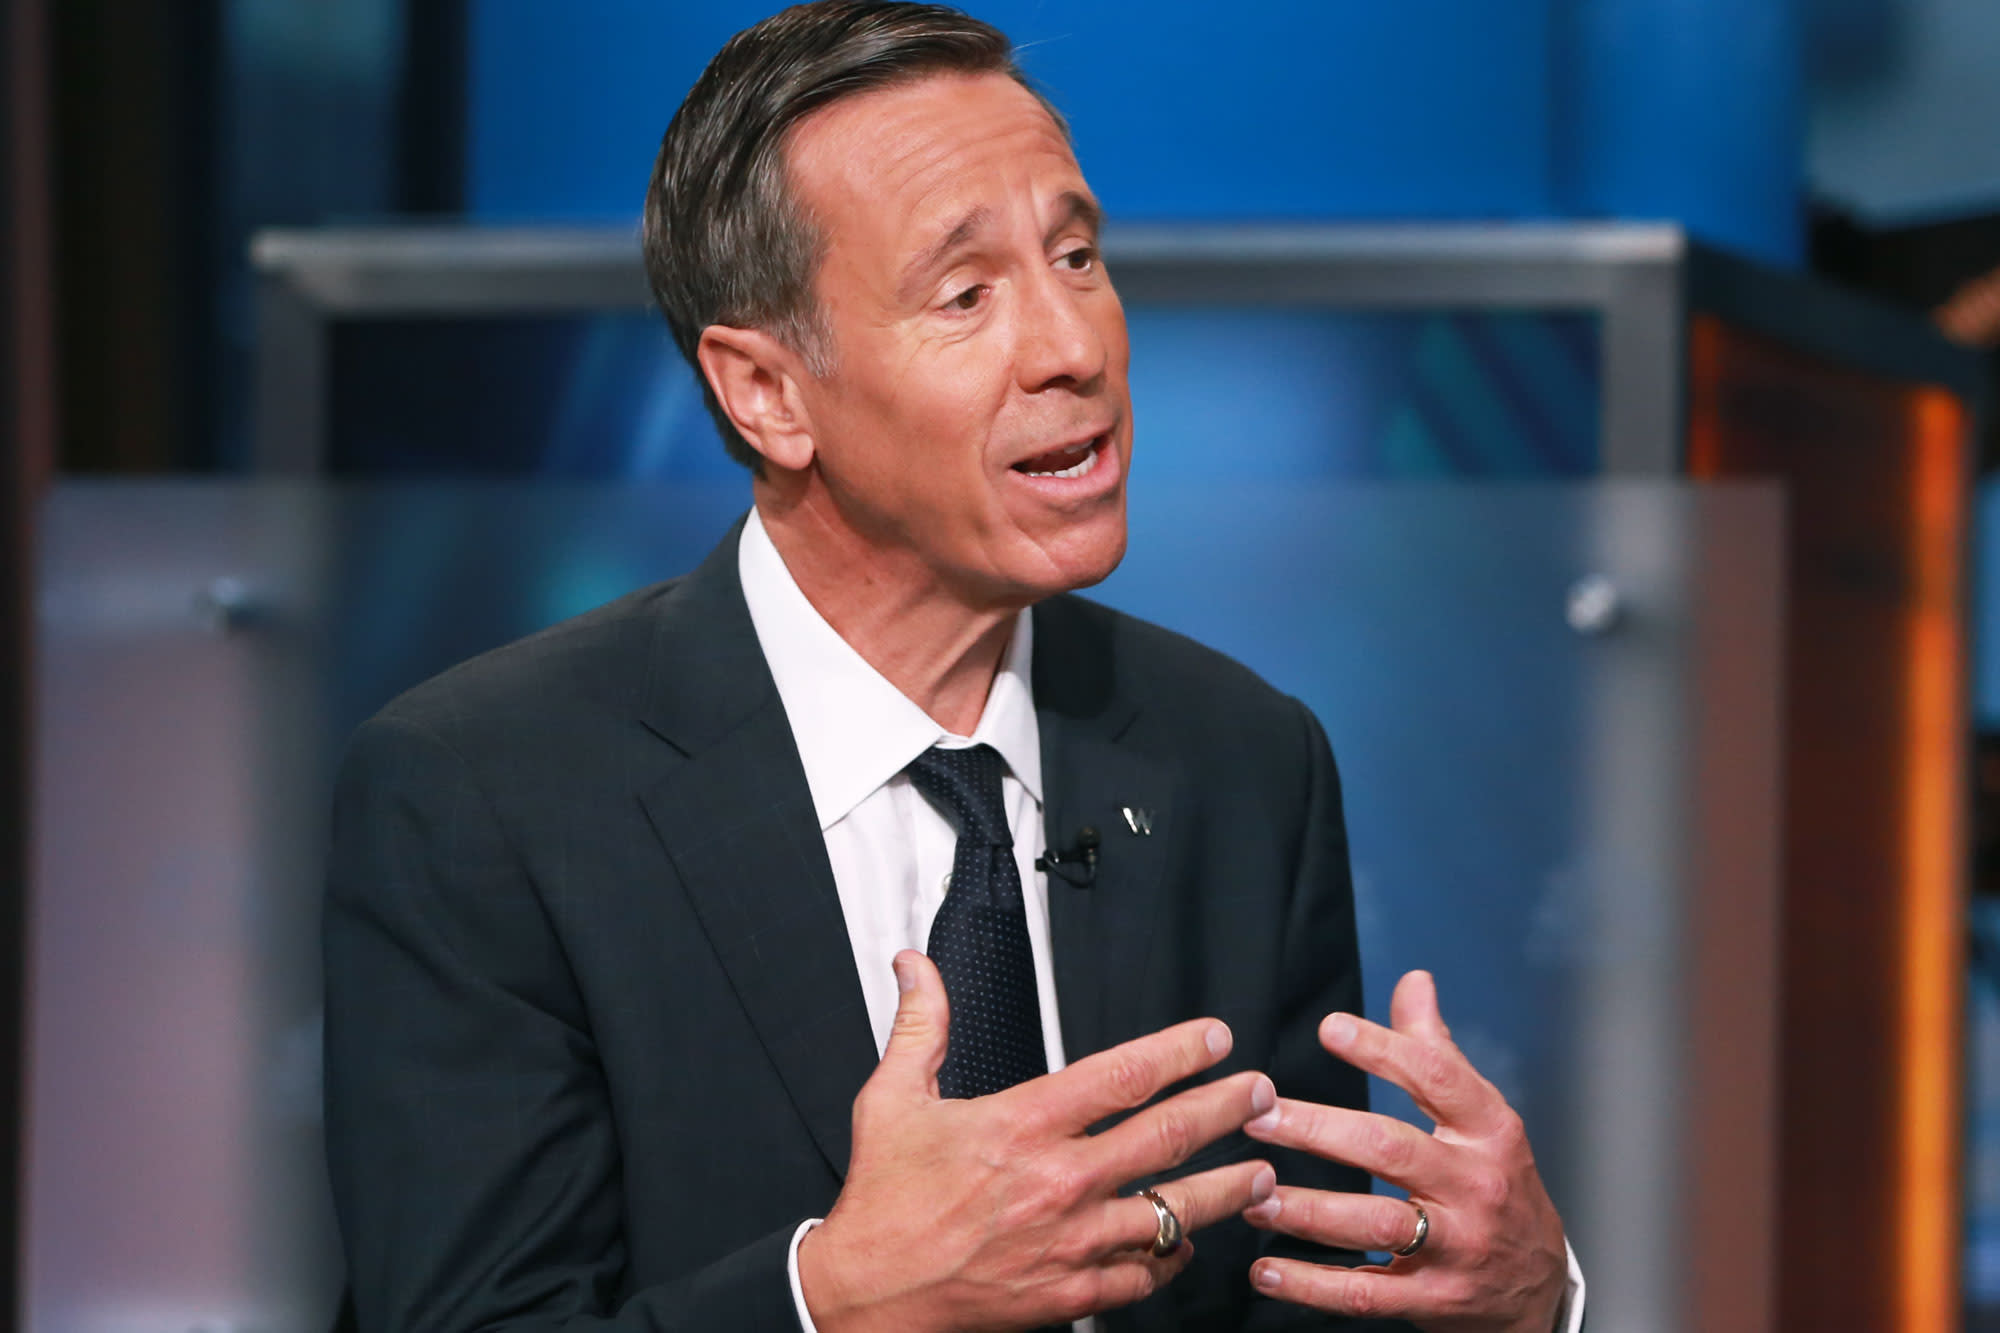 Marriott CEO Arne Sorenson remembered for main along with his coronary heart